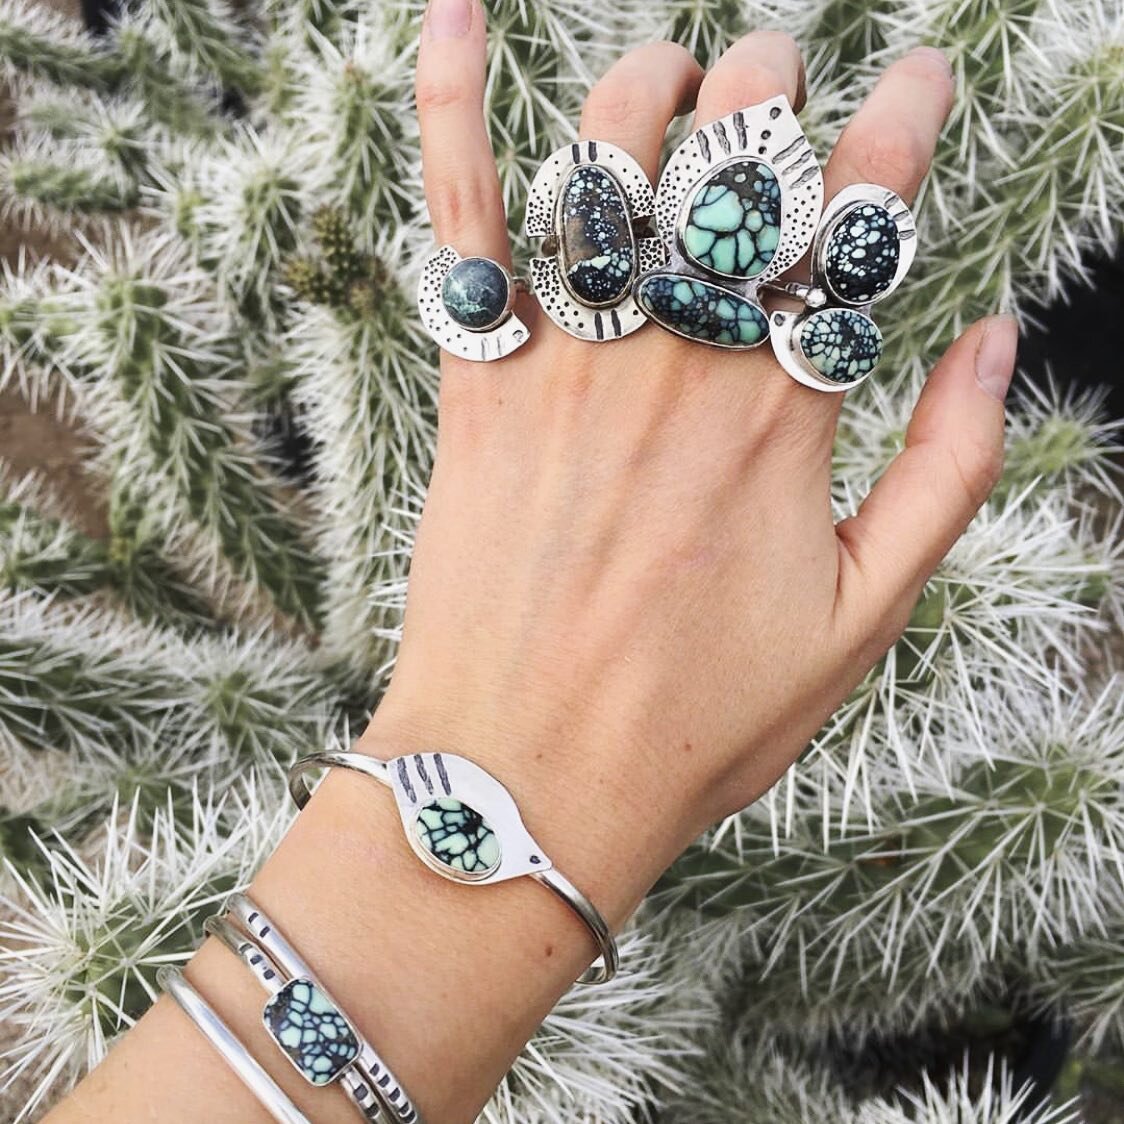 y'all! my gurl @cheyennecannonjewelry just dropped the most gorgeous collection of handmade silver + stone pieces! i have a similar bracelet i was so lucky to have purchased a couple years ago.  i covet it regularly, growing only more fond of it over